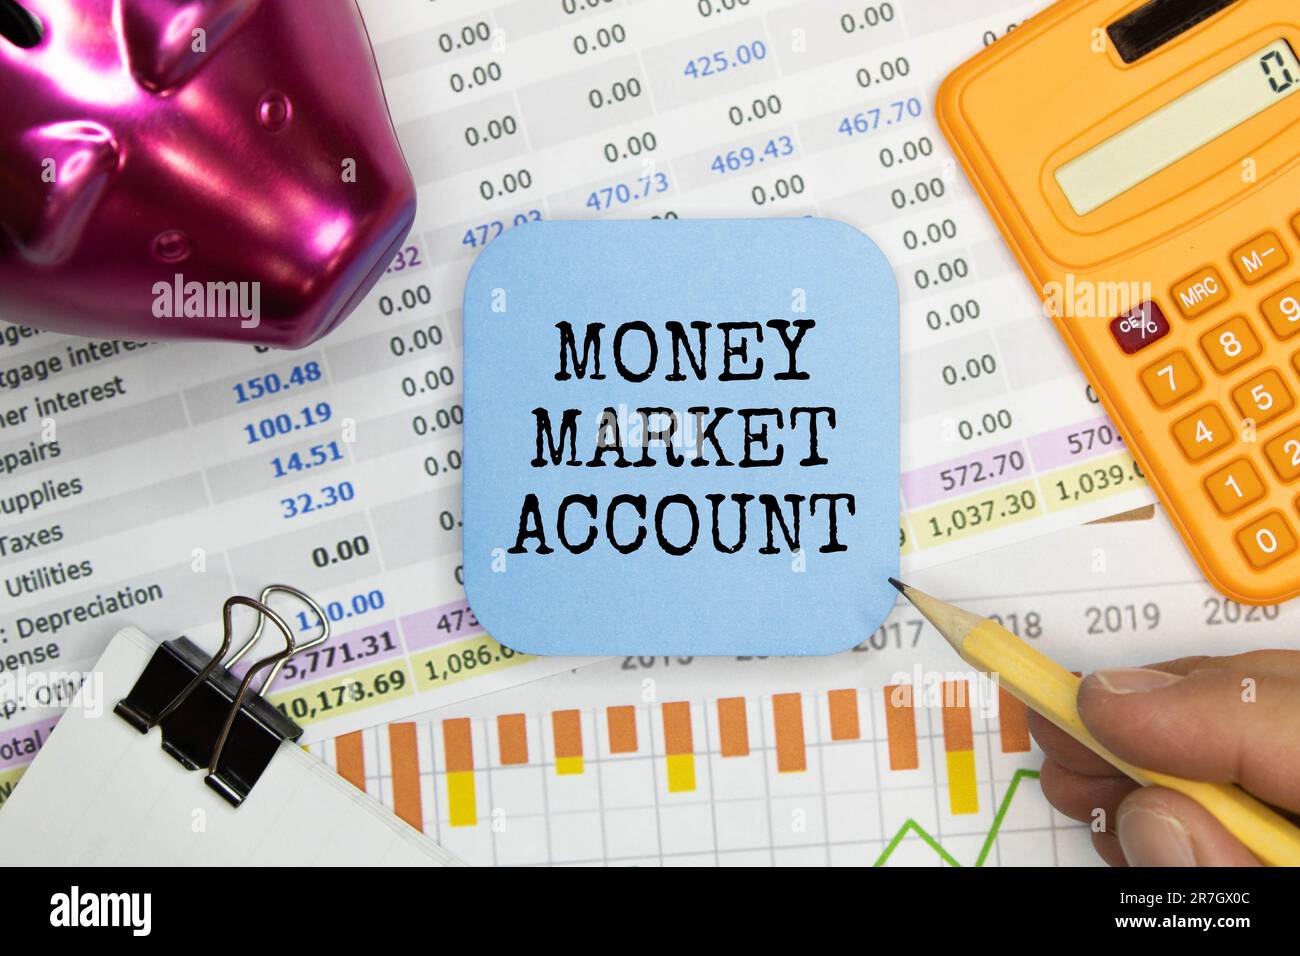 MONEY MARKET ACCOUNT text on blue pieces of paper on yellow background, business concept Stock Photo